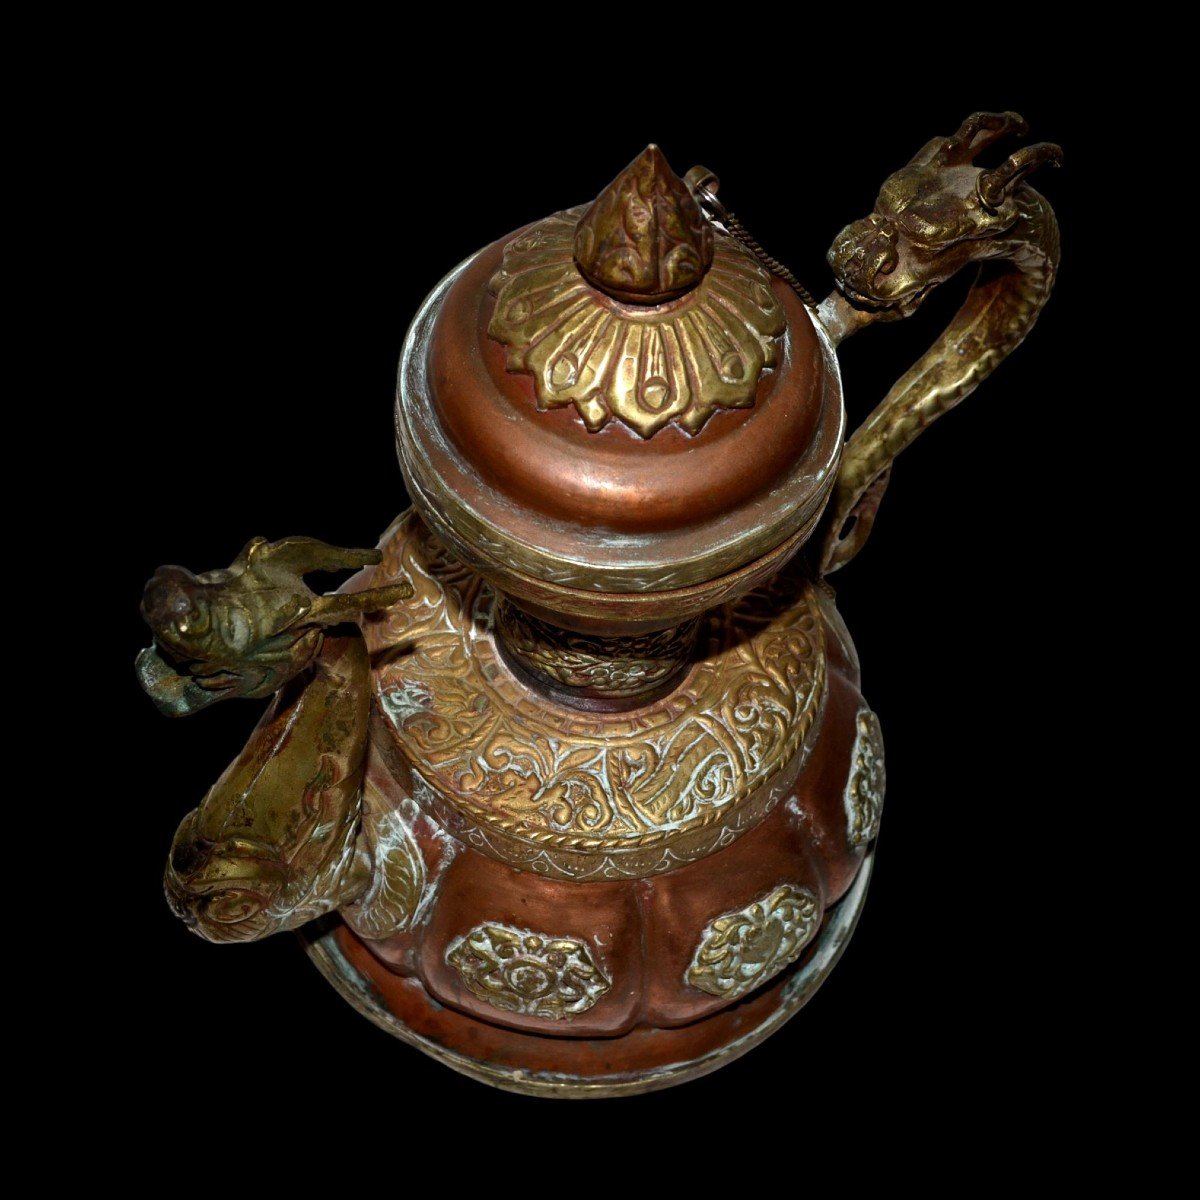 Teapot With Dragons, Tibet, Signs Of Good Omens, Circa 1920/1930 In Collectible Condition-photo-1